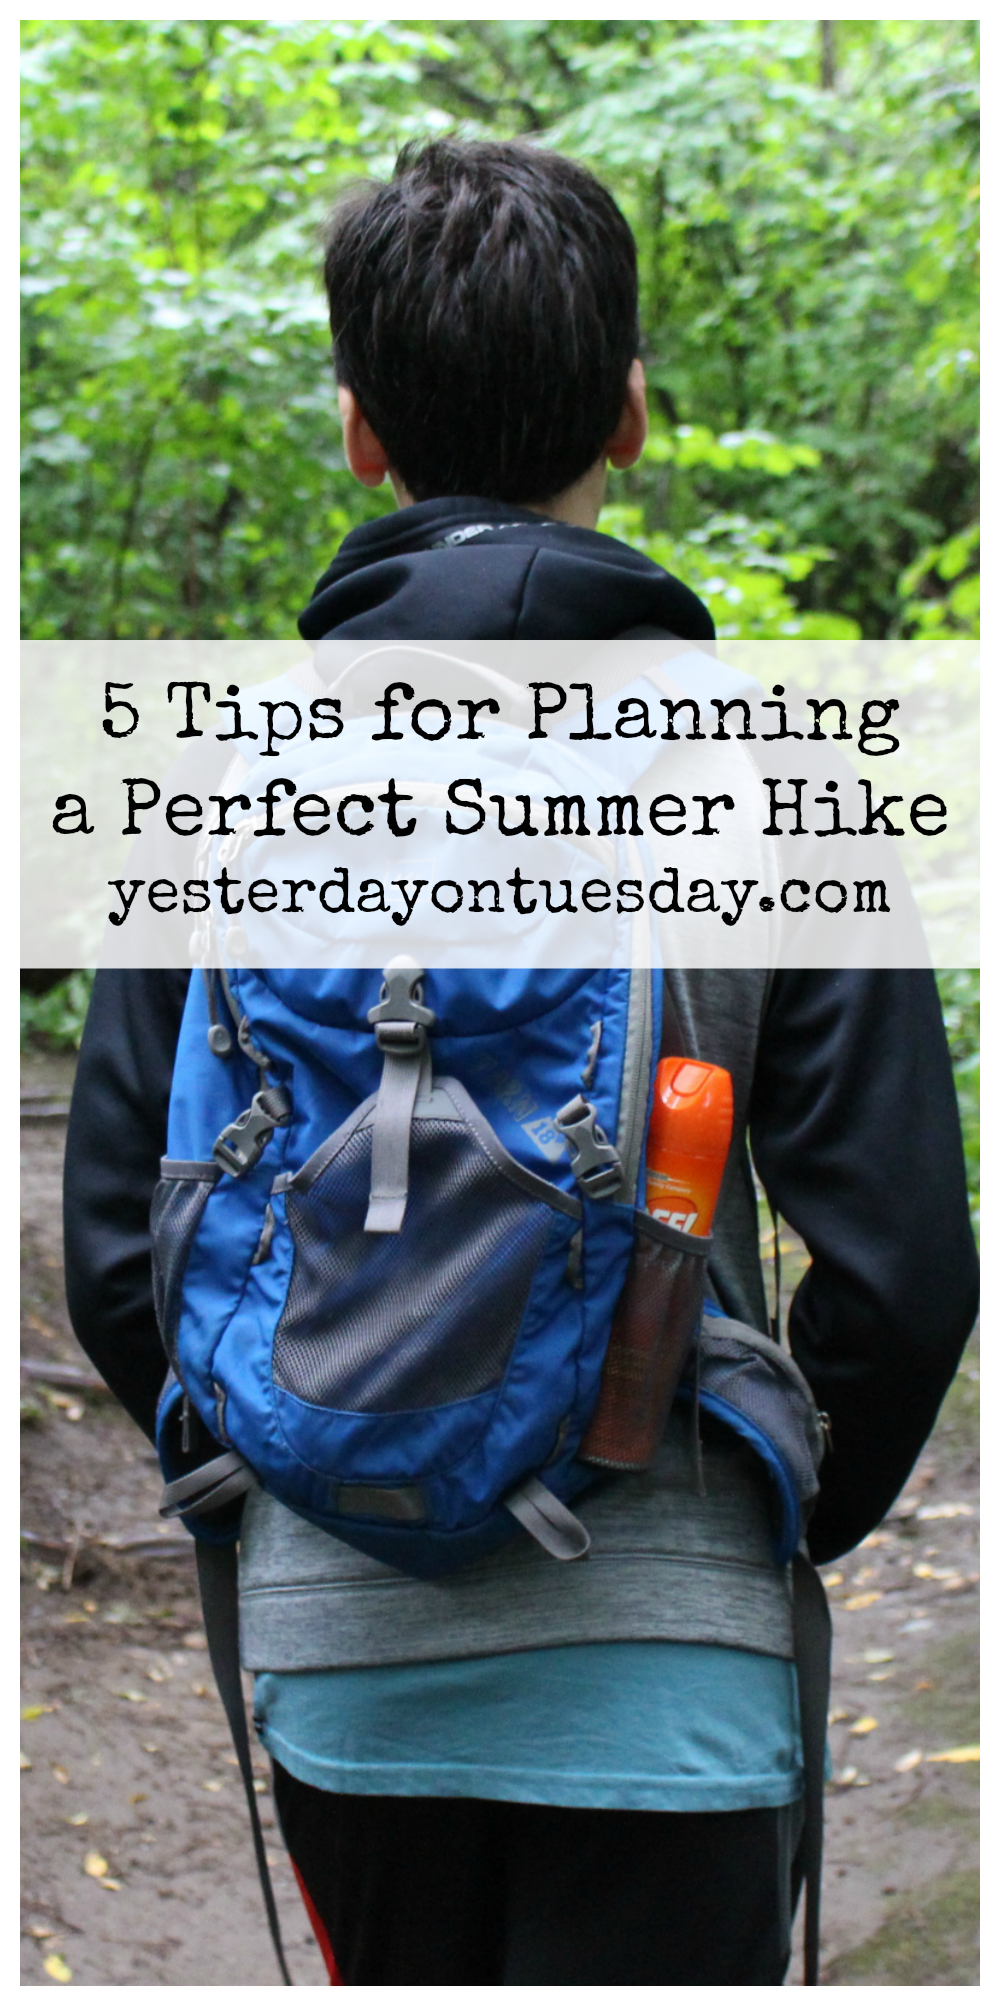 5 Tips for Planning a Perfect Summer Hike